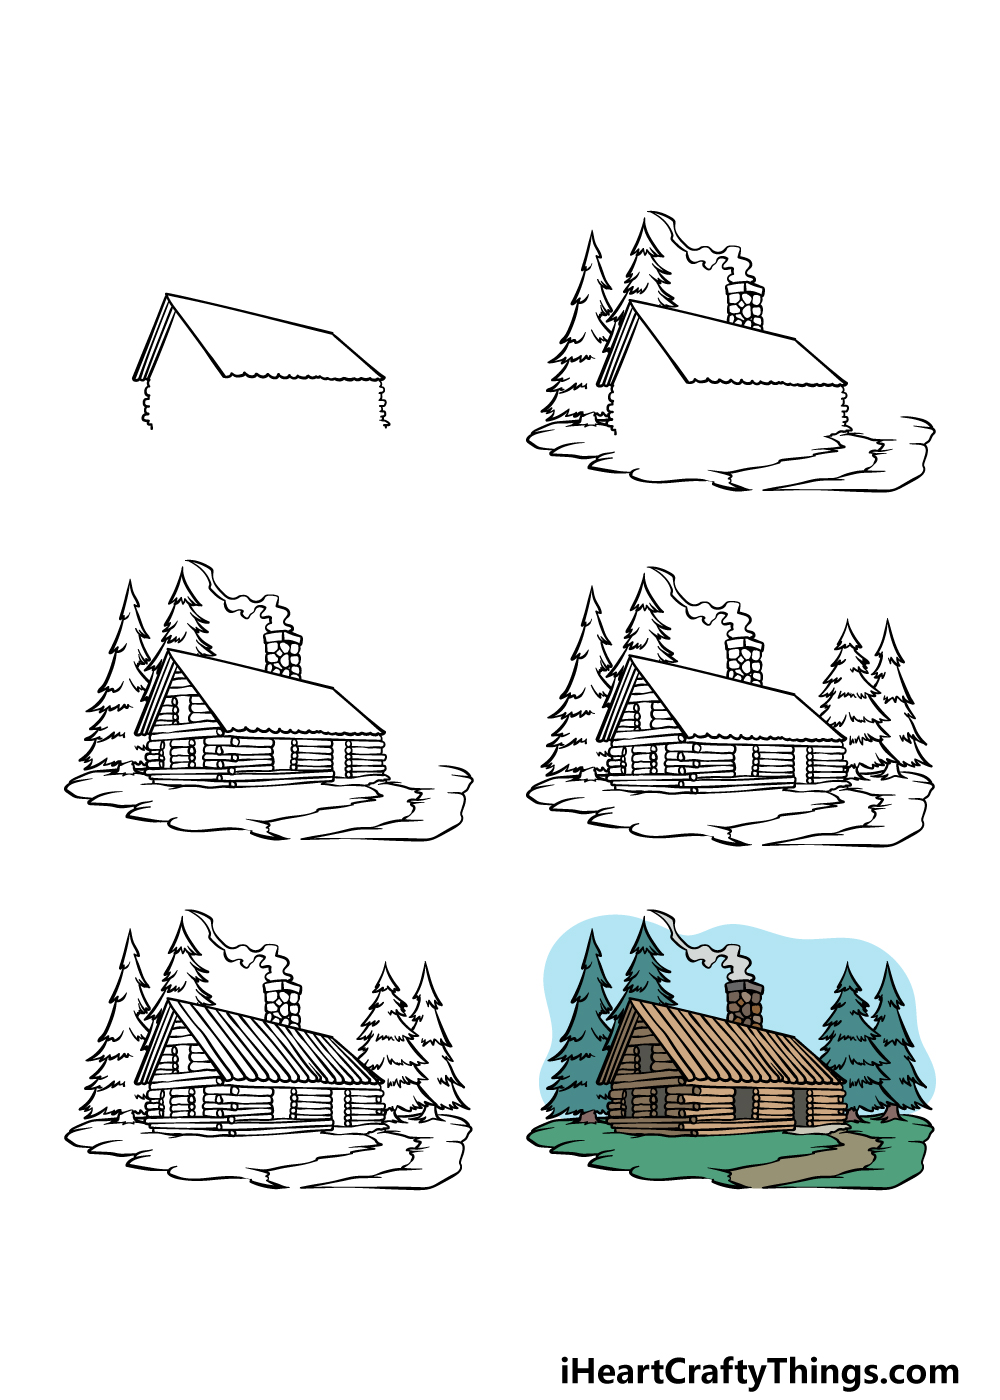 how to draw a cabin in 6 easy steps